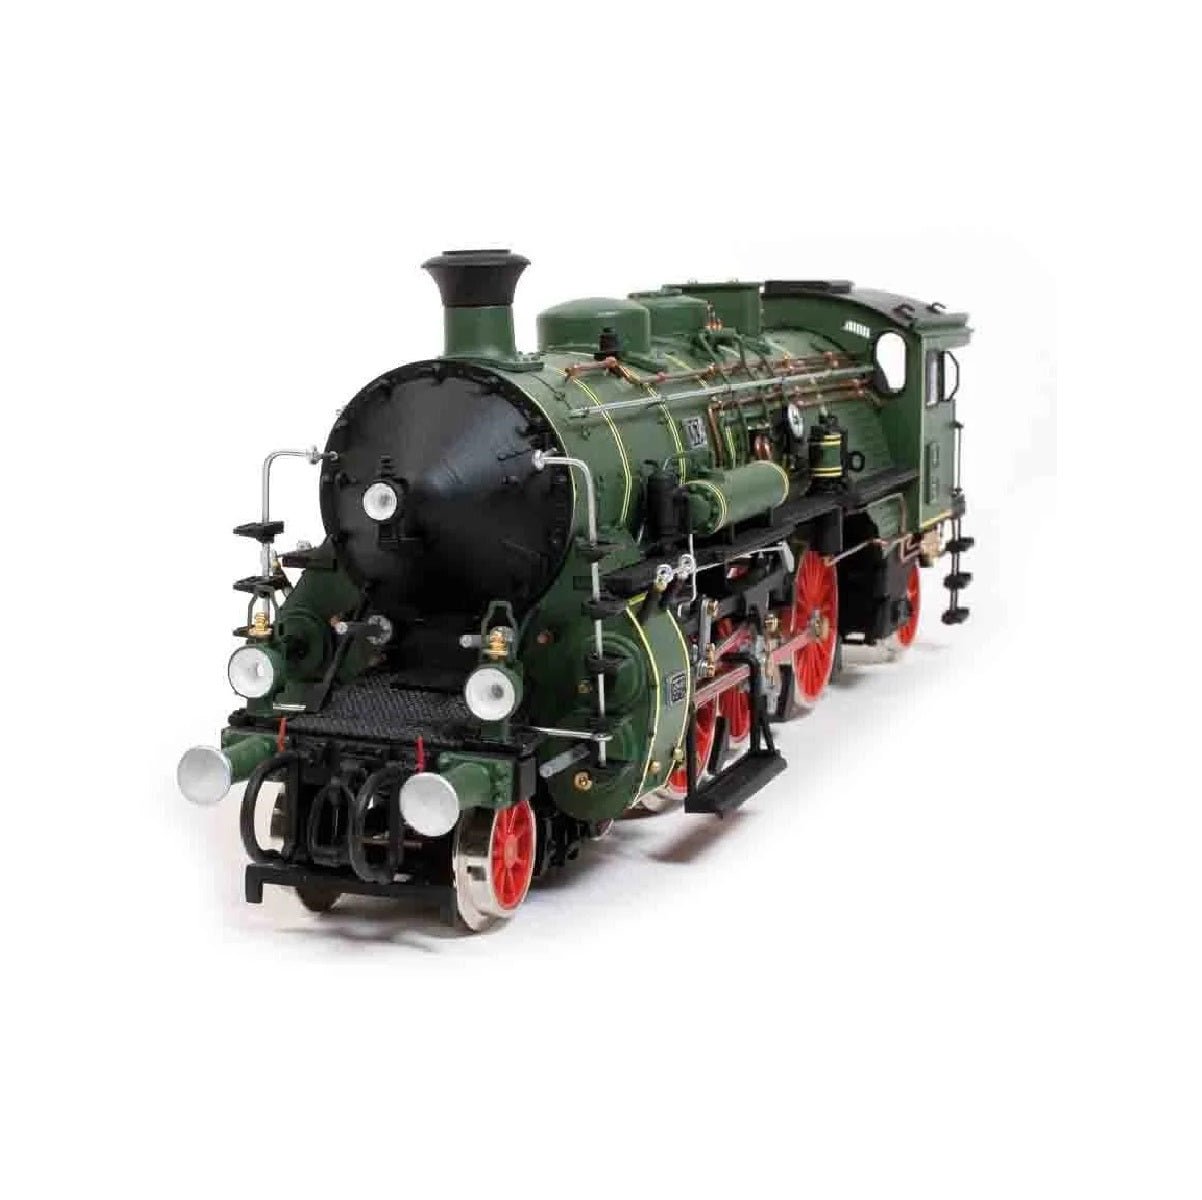 OcCre® S3/6 BR 18 Steam Locomotive Wooden Model Kit, 1/32 Scale